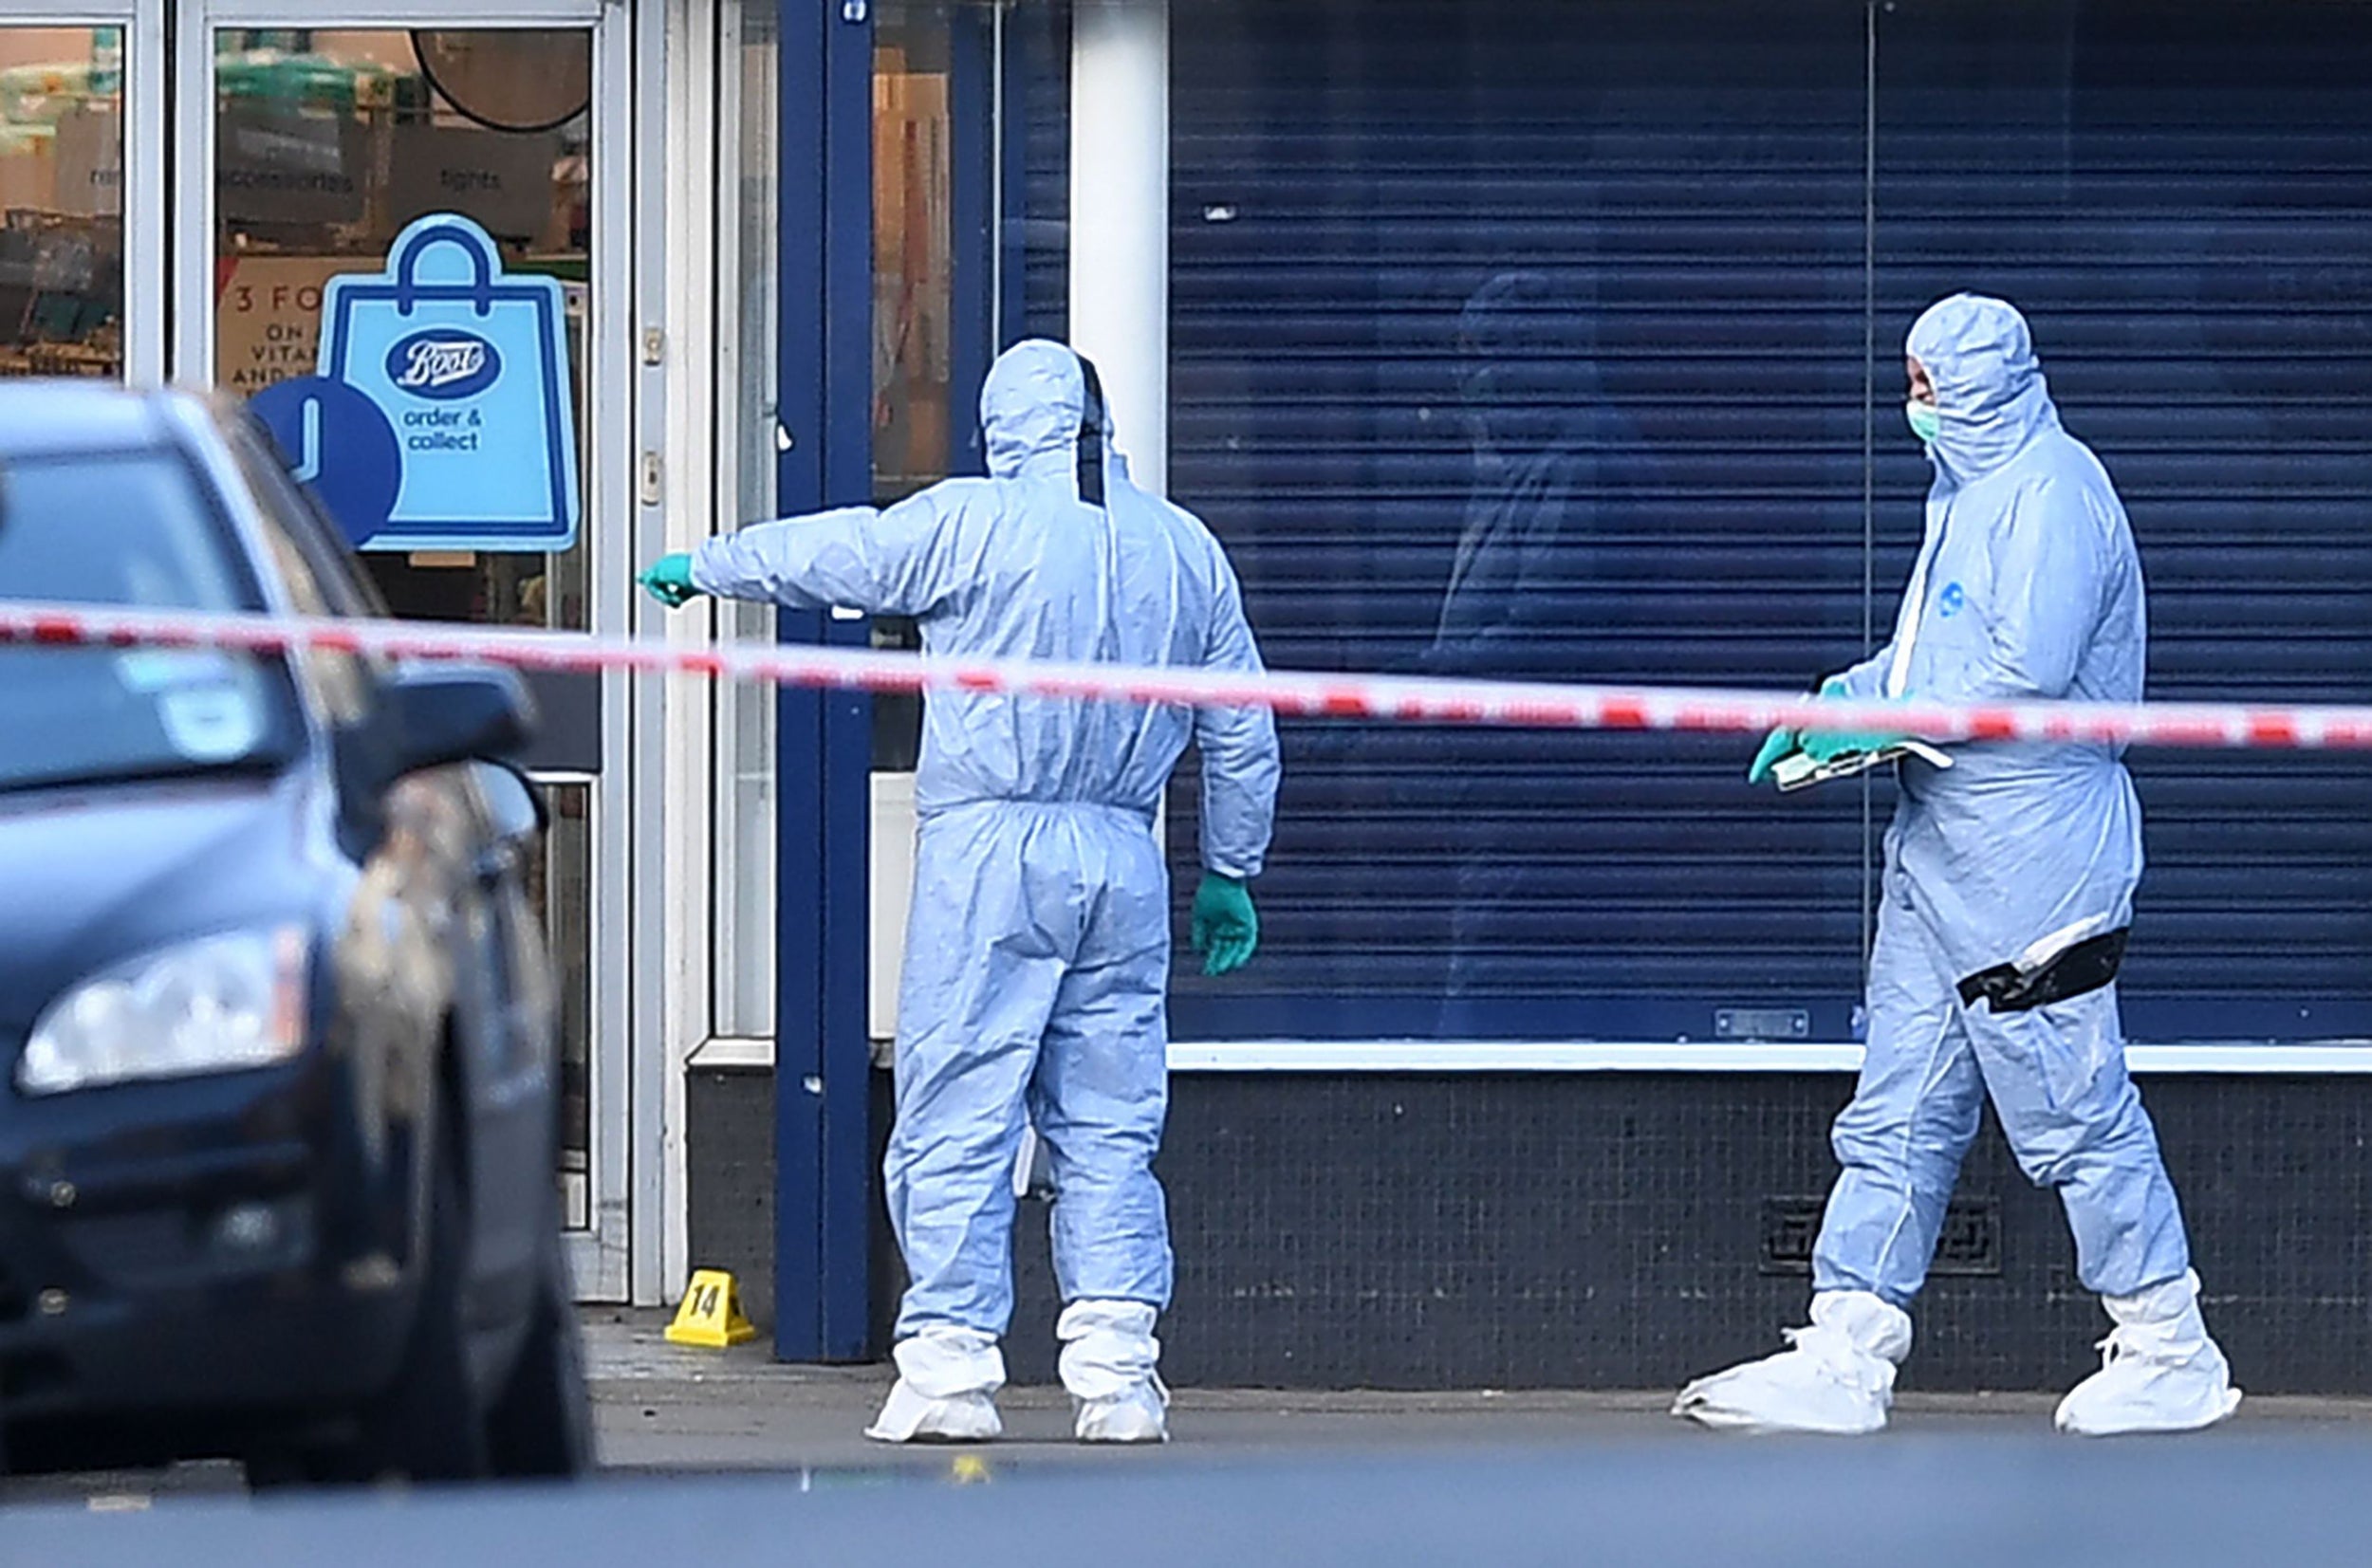 Forensic officers at the scene of the attack on Streatham High Road